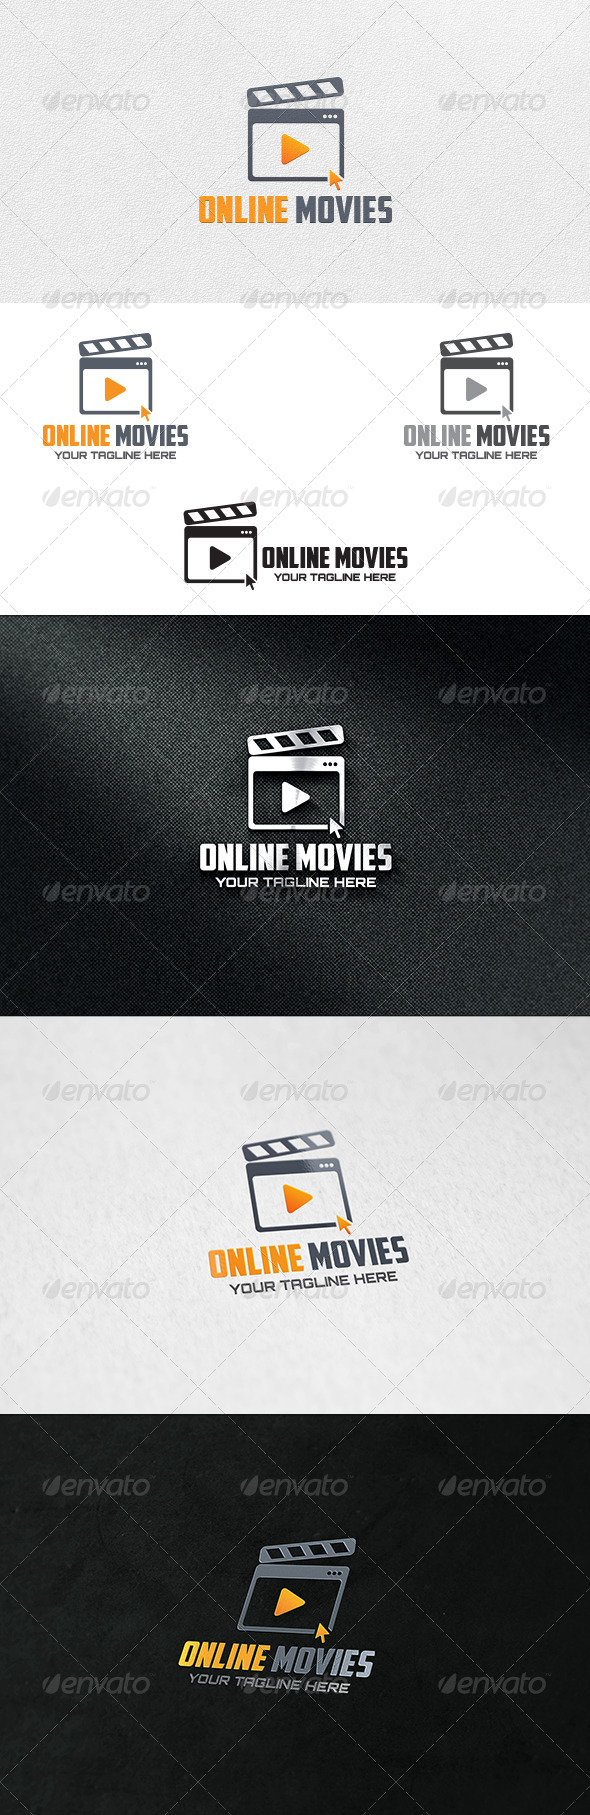 Online Movies - Logo Template